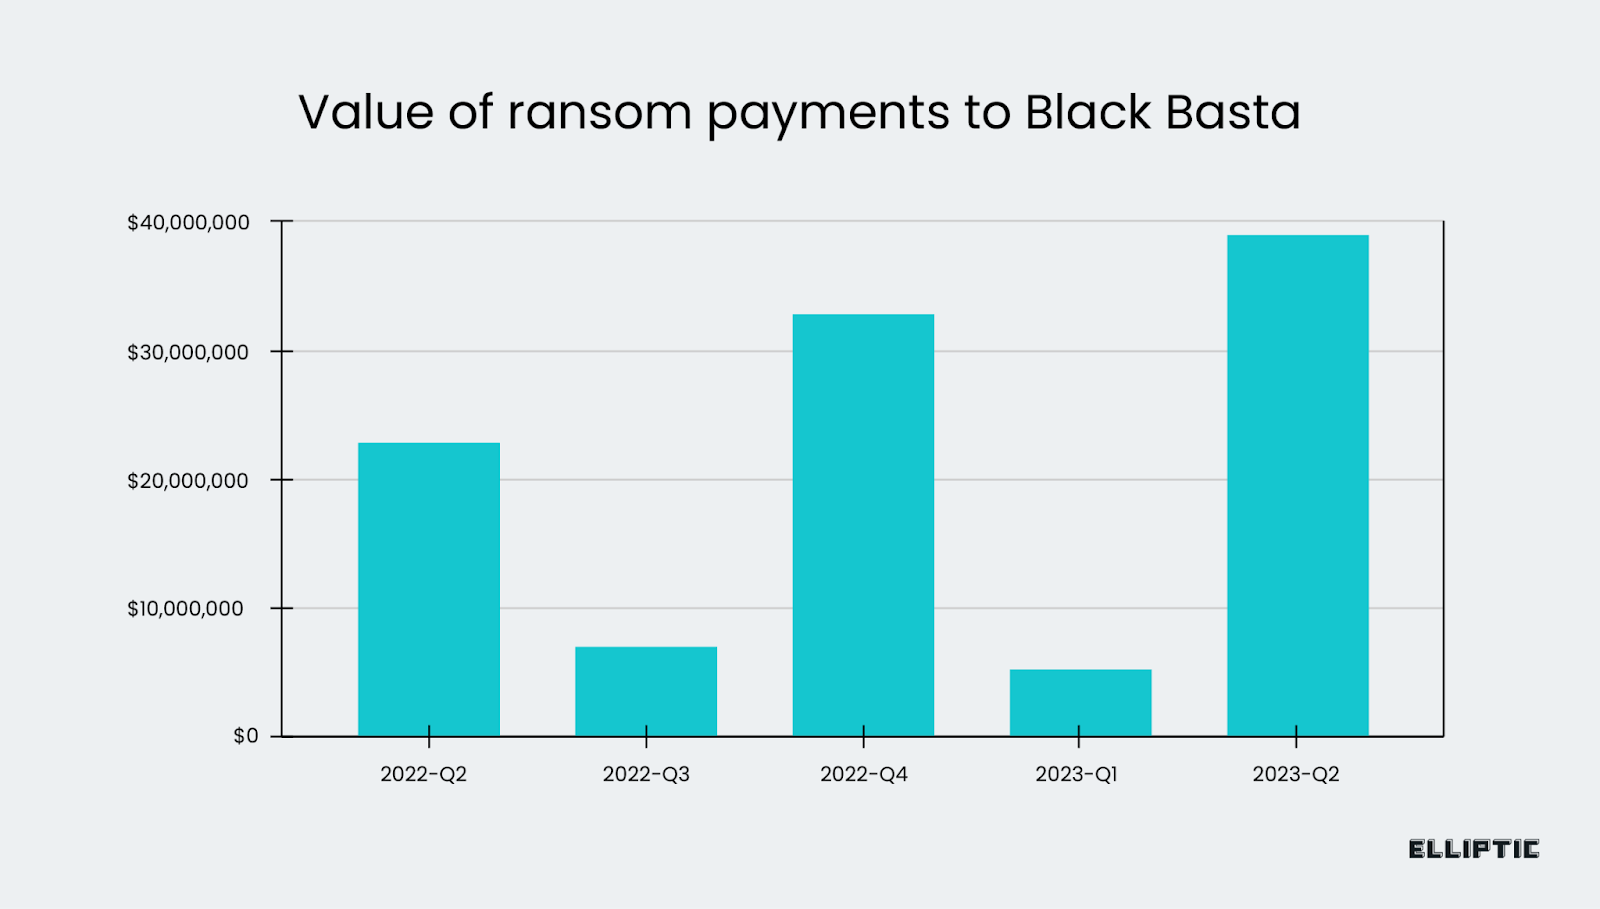 [BAR GRAPH] Value of ransom payments to Black Basta from Q2 2022 - Q2 2023